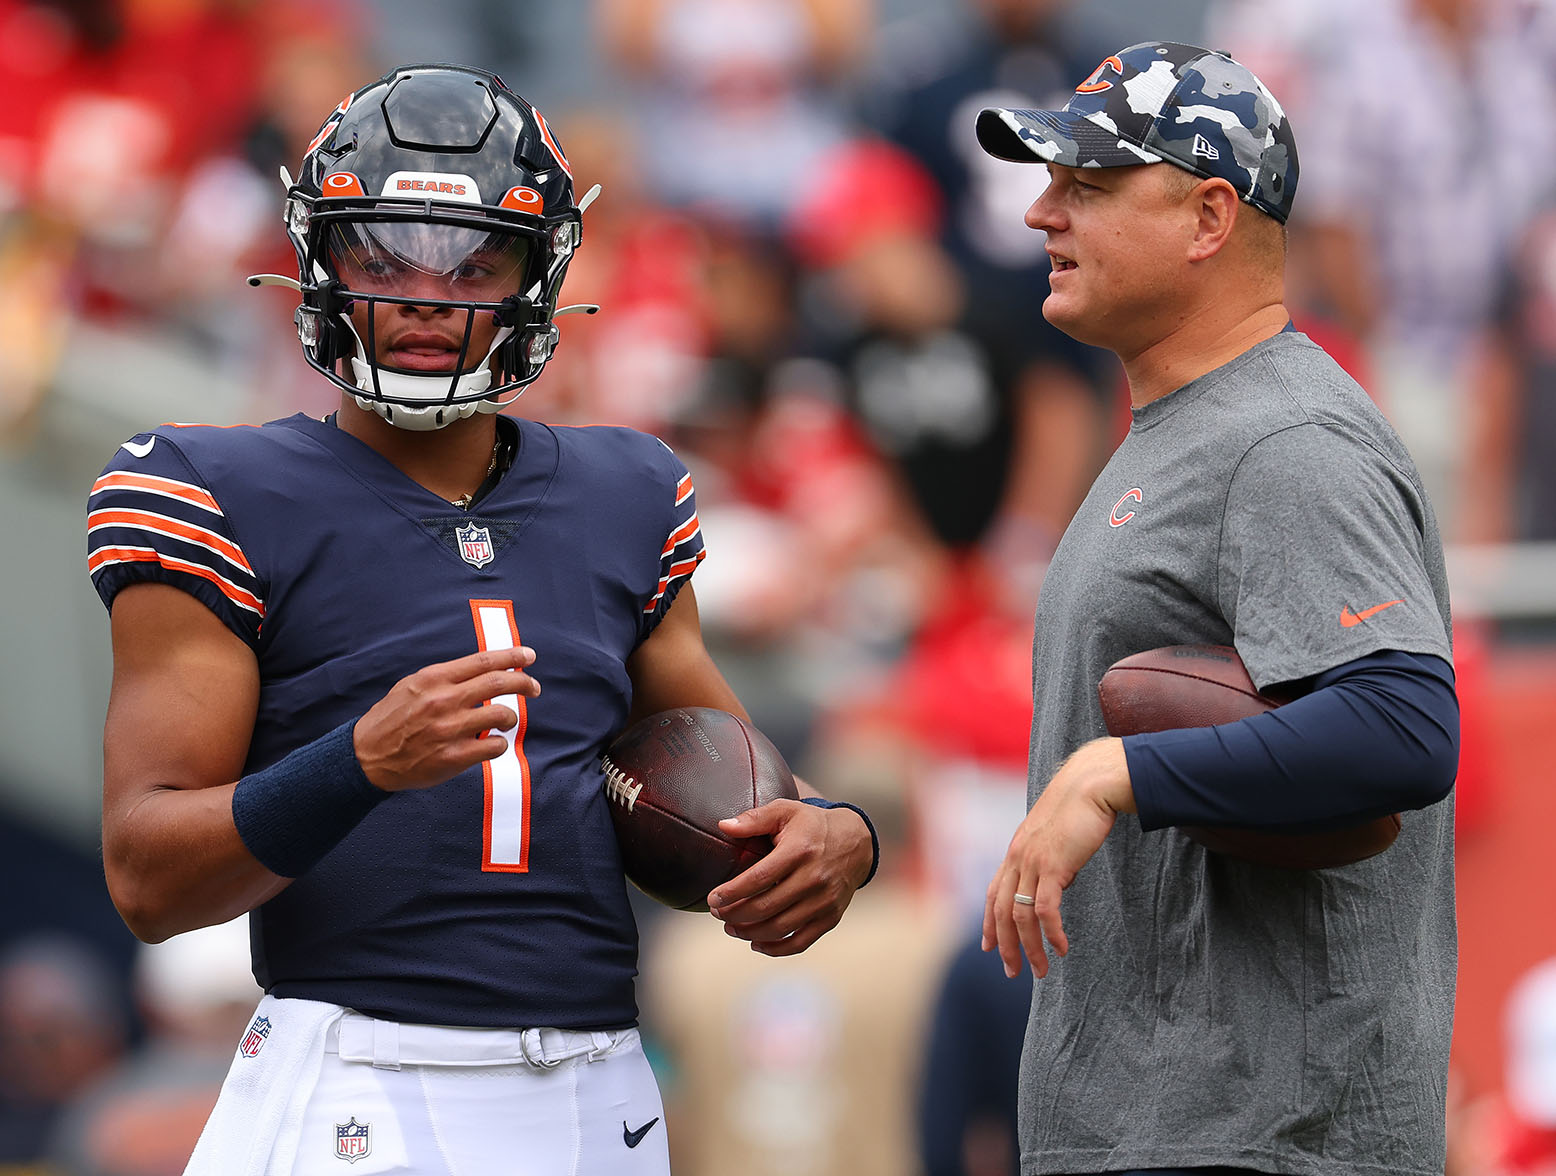 CHICAGO, ILLINOIS - AUGUST 13: Justin Fields #1 of the Chicago Bears talks with offensive coordinator Luke Getsy prior to a preseason game against the Kansas City Chiefs at Soldier Field on August 13, 2022 in Chicago, Illinois. (Photo by Michael Reaves/Getty Images)